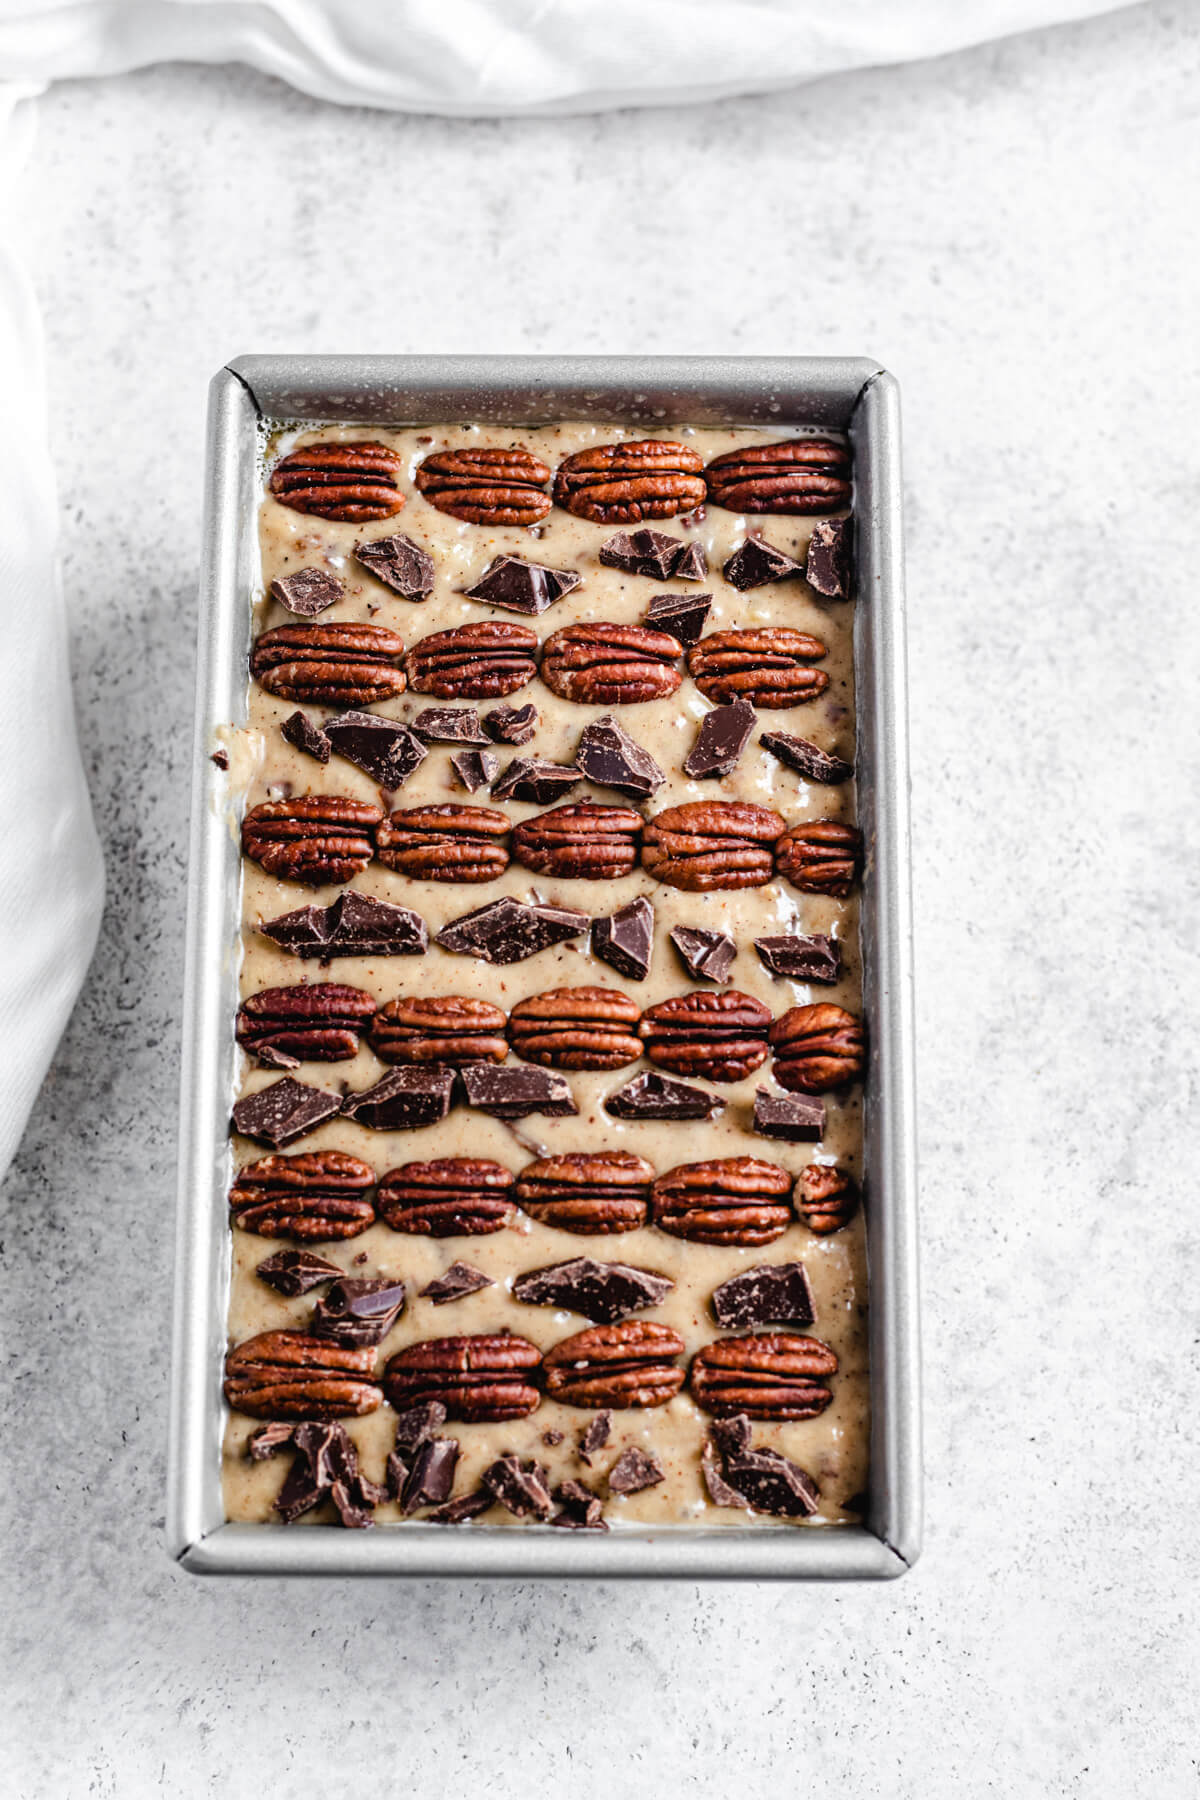 banana bread batter in a loaf pan with rows of pecans and chopped chocolate lined on top